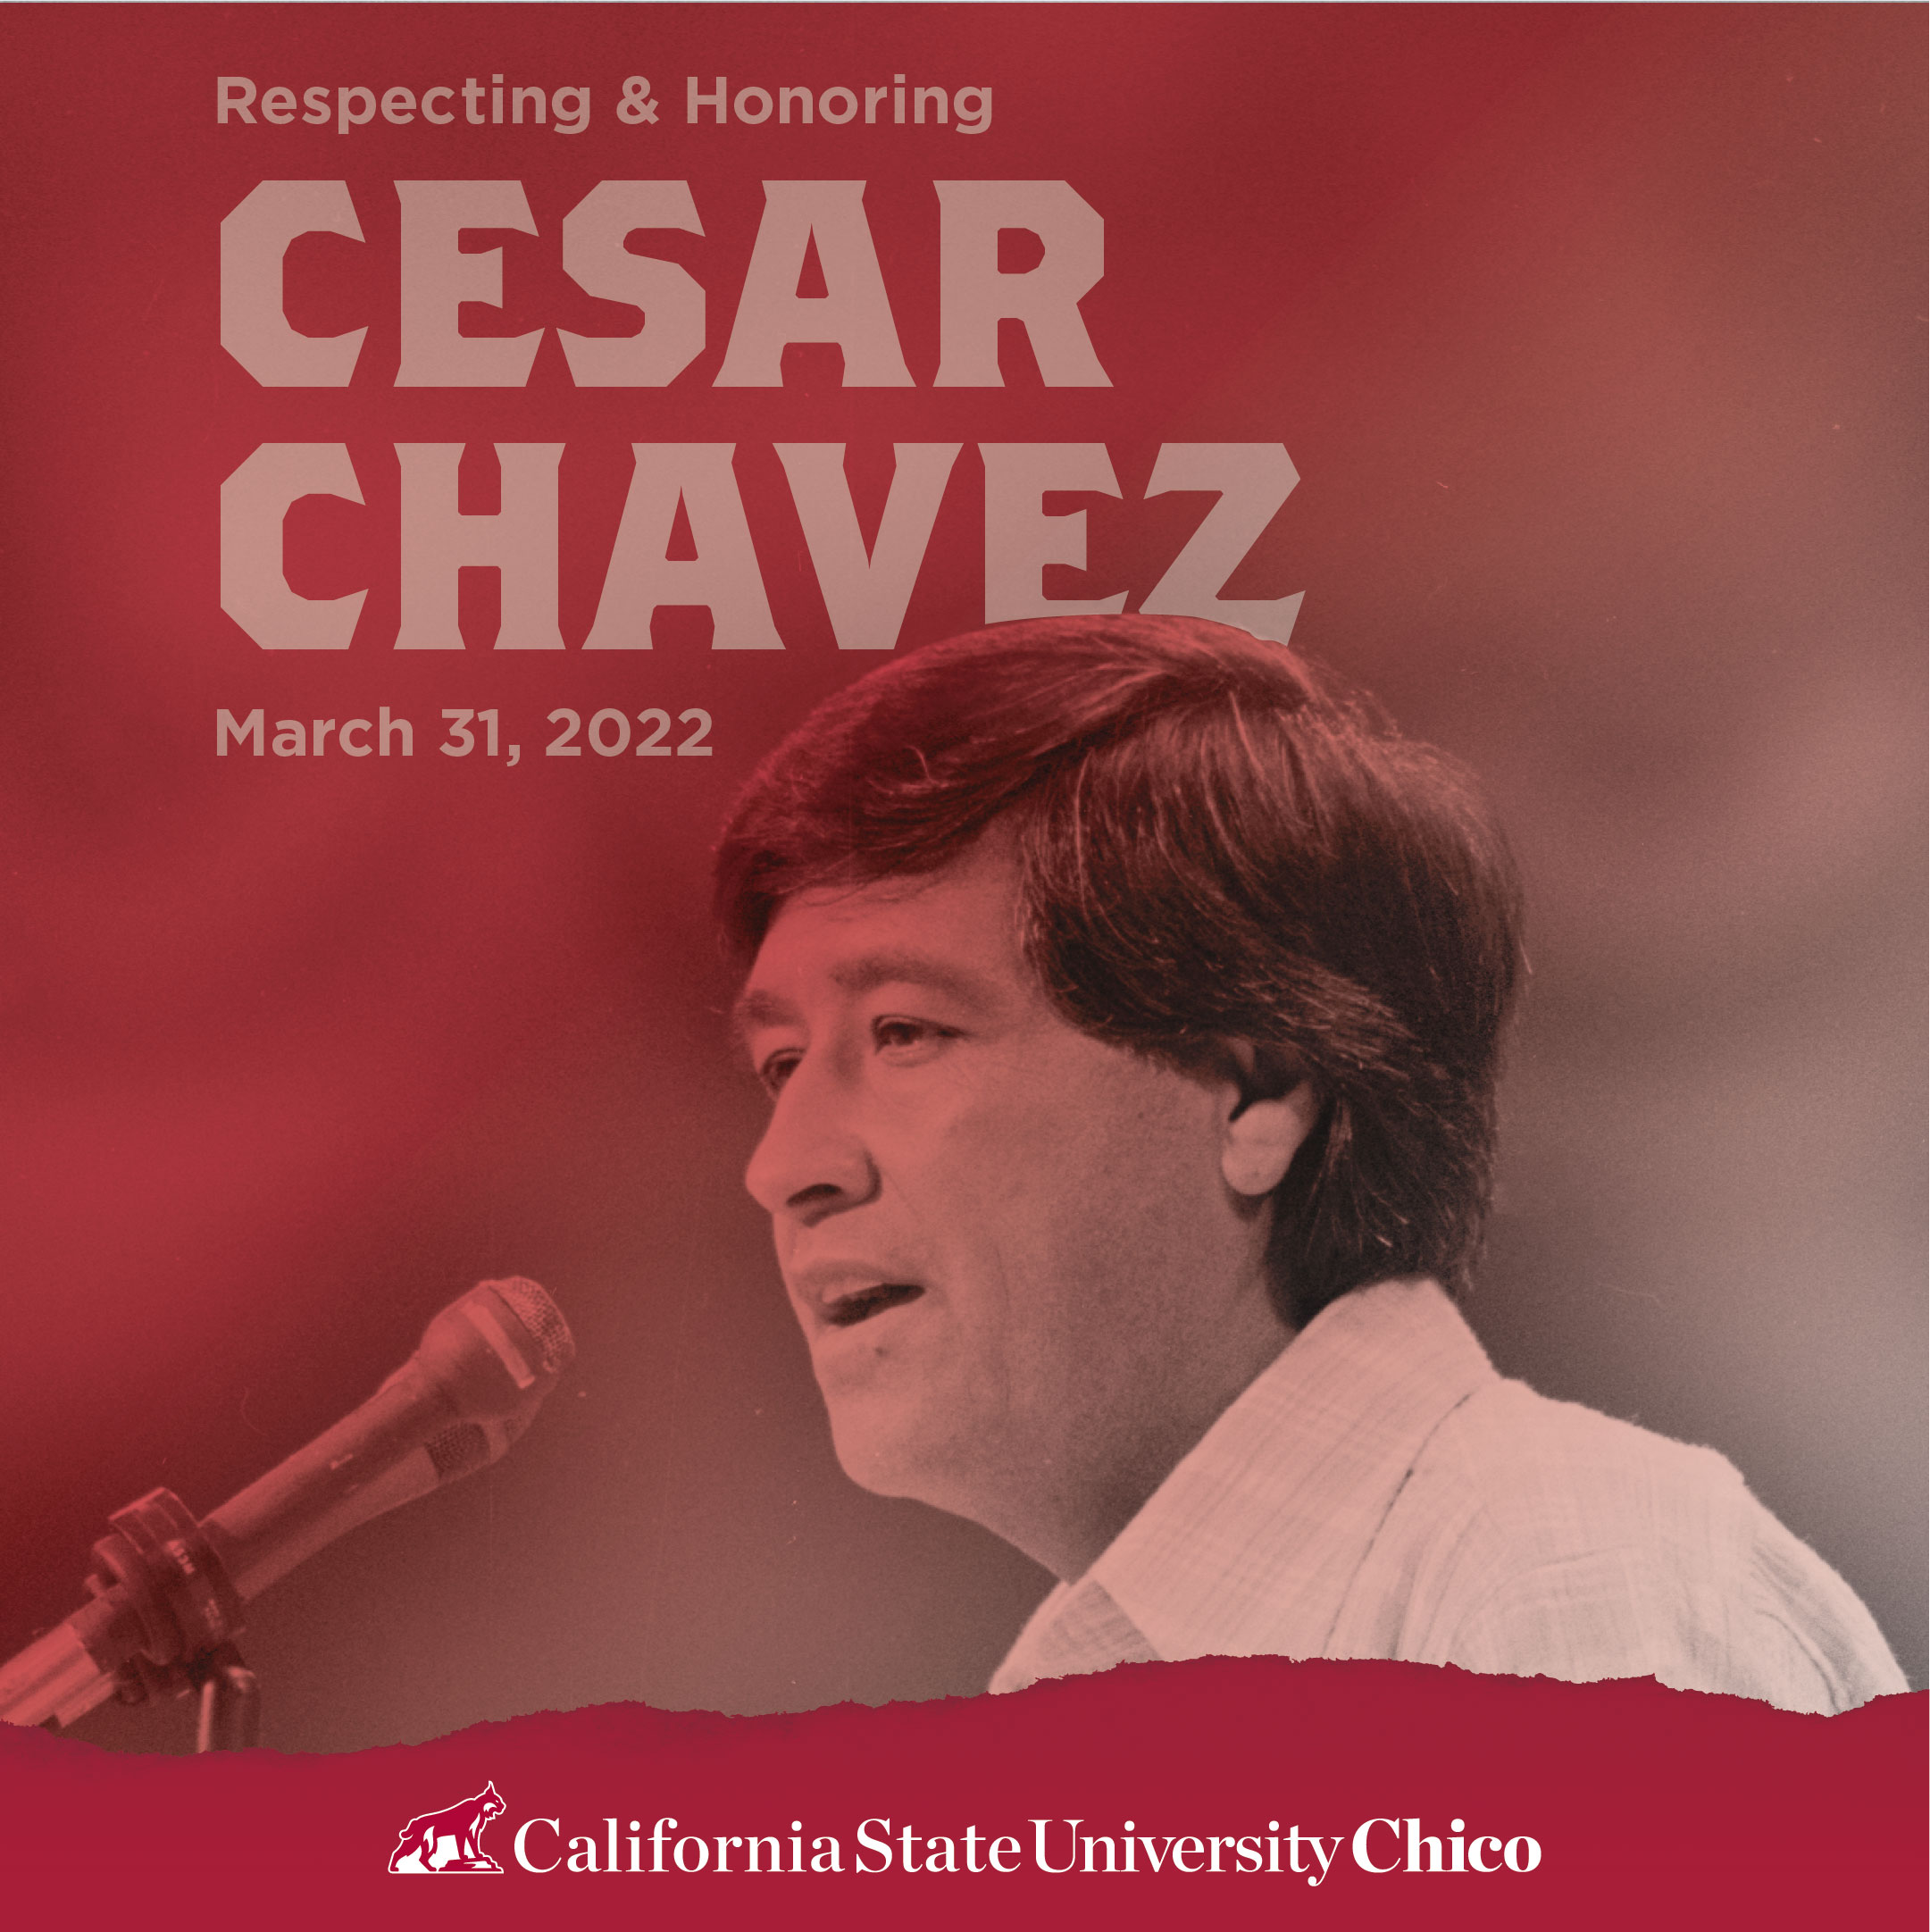 image of cesar chavez speaking at a microphone. 